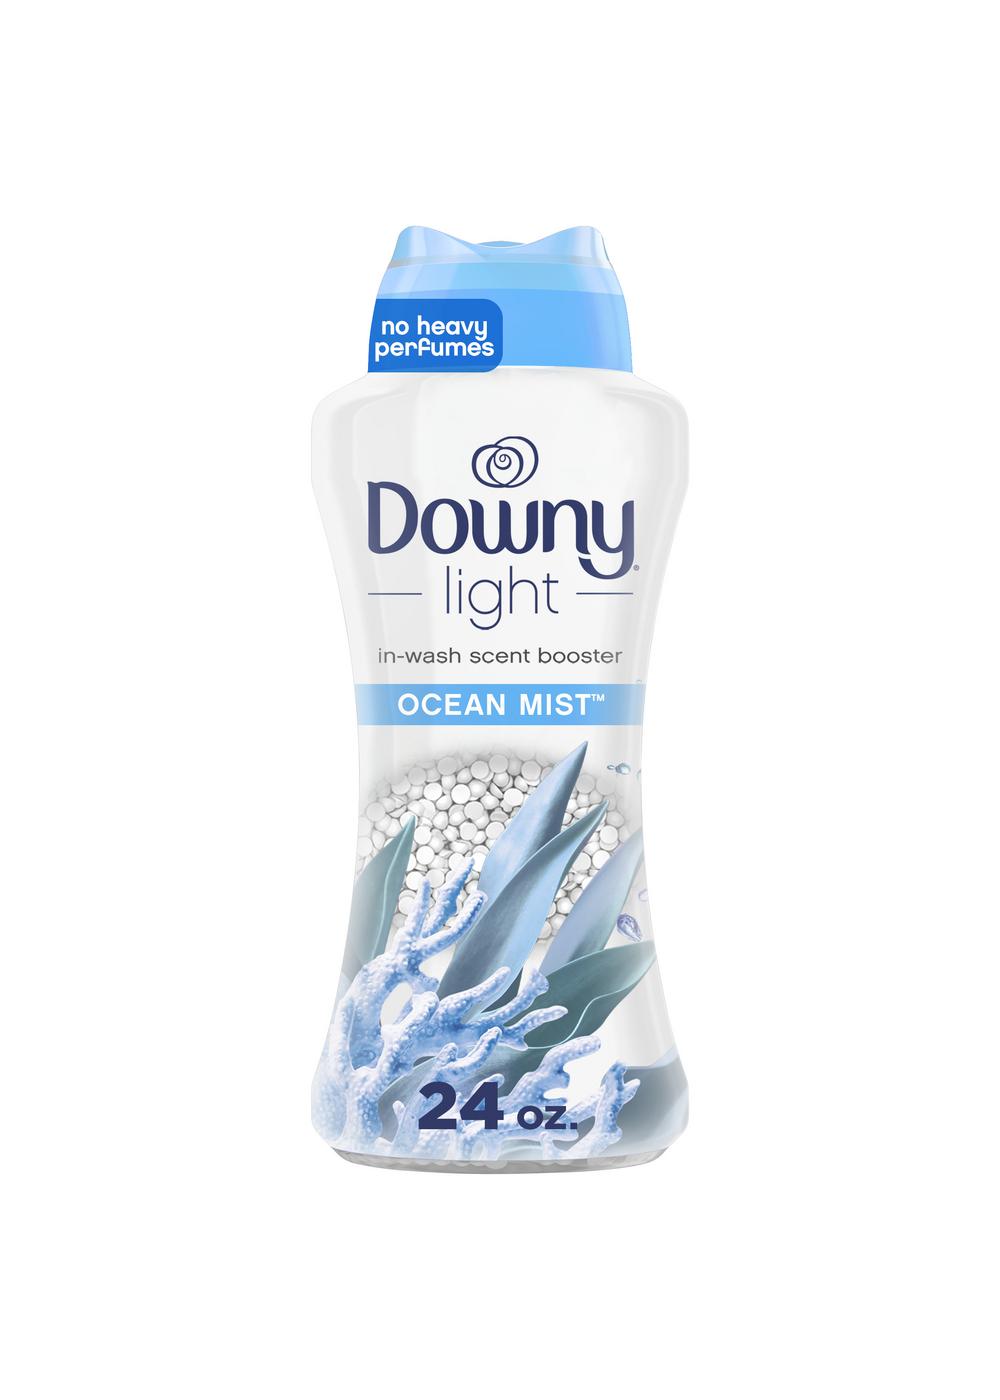 Downy Light In-Wash Scent Booster - Ocean Mist; image 1 of 7